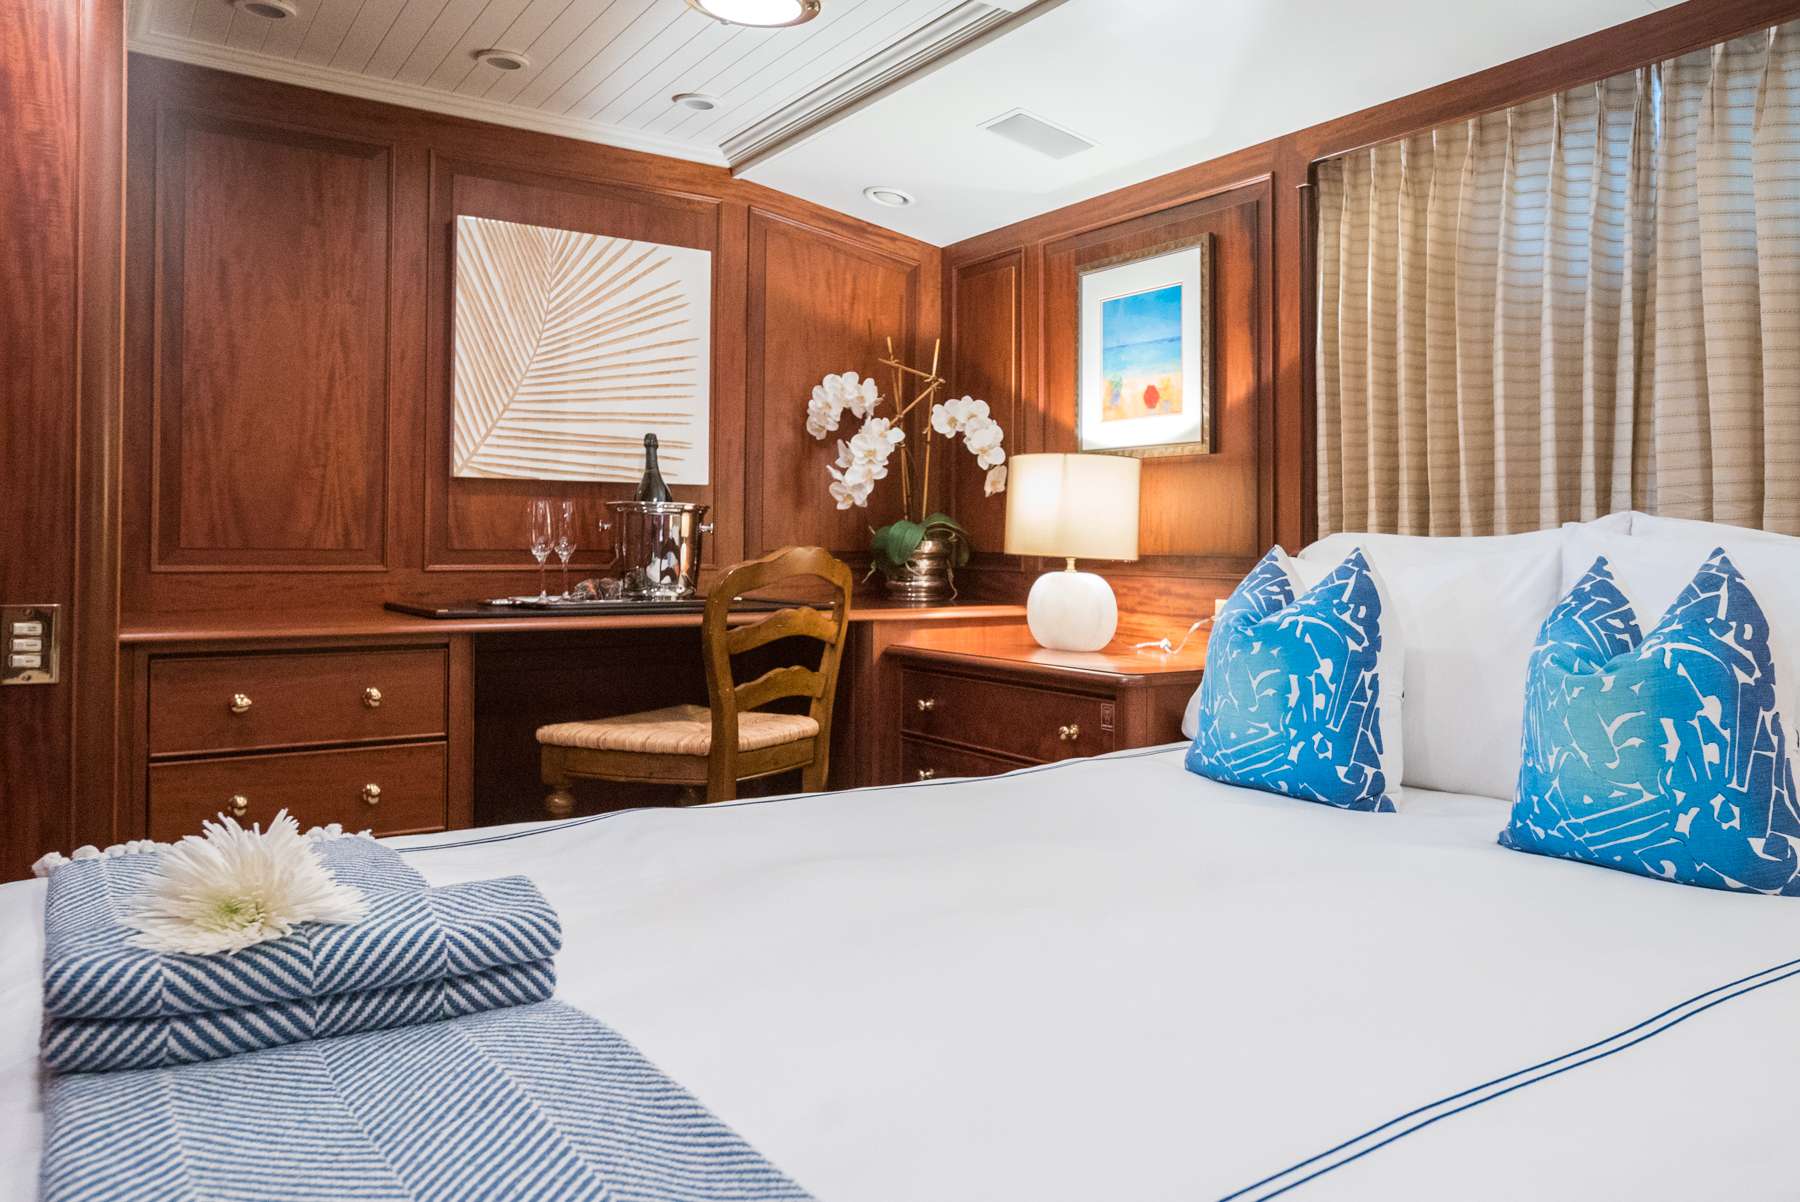 LADY J Yacht Charter - Queen Stateroom